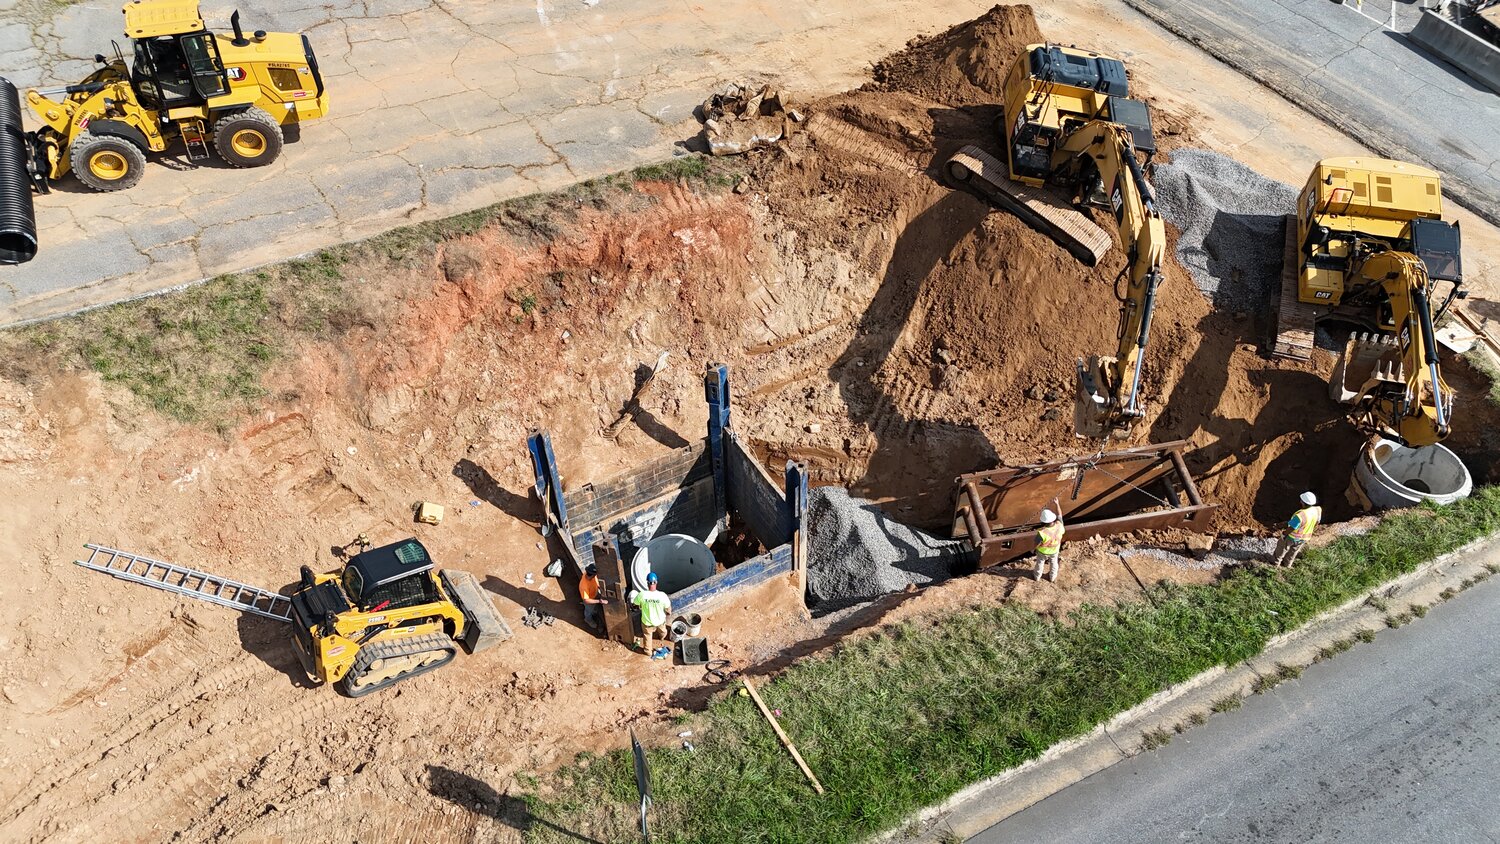 Work is progressing well on the repairs at the sinkhole site next to the Morganton Post Office.